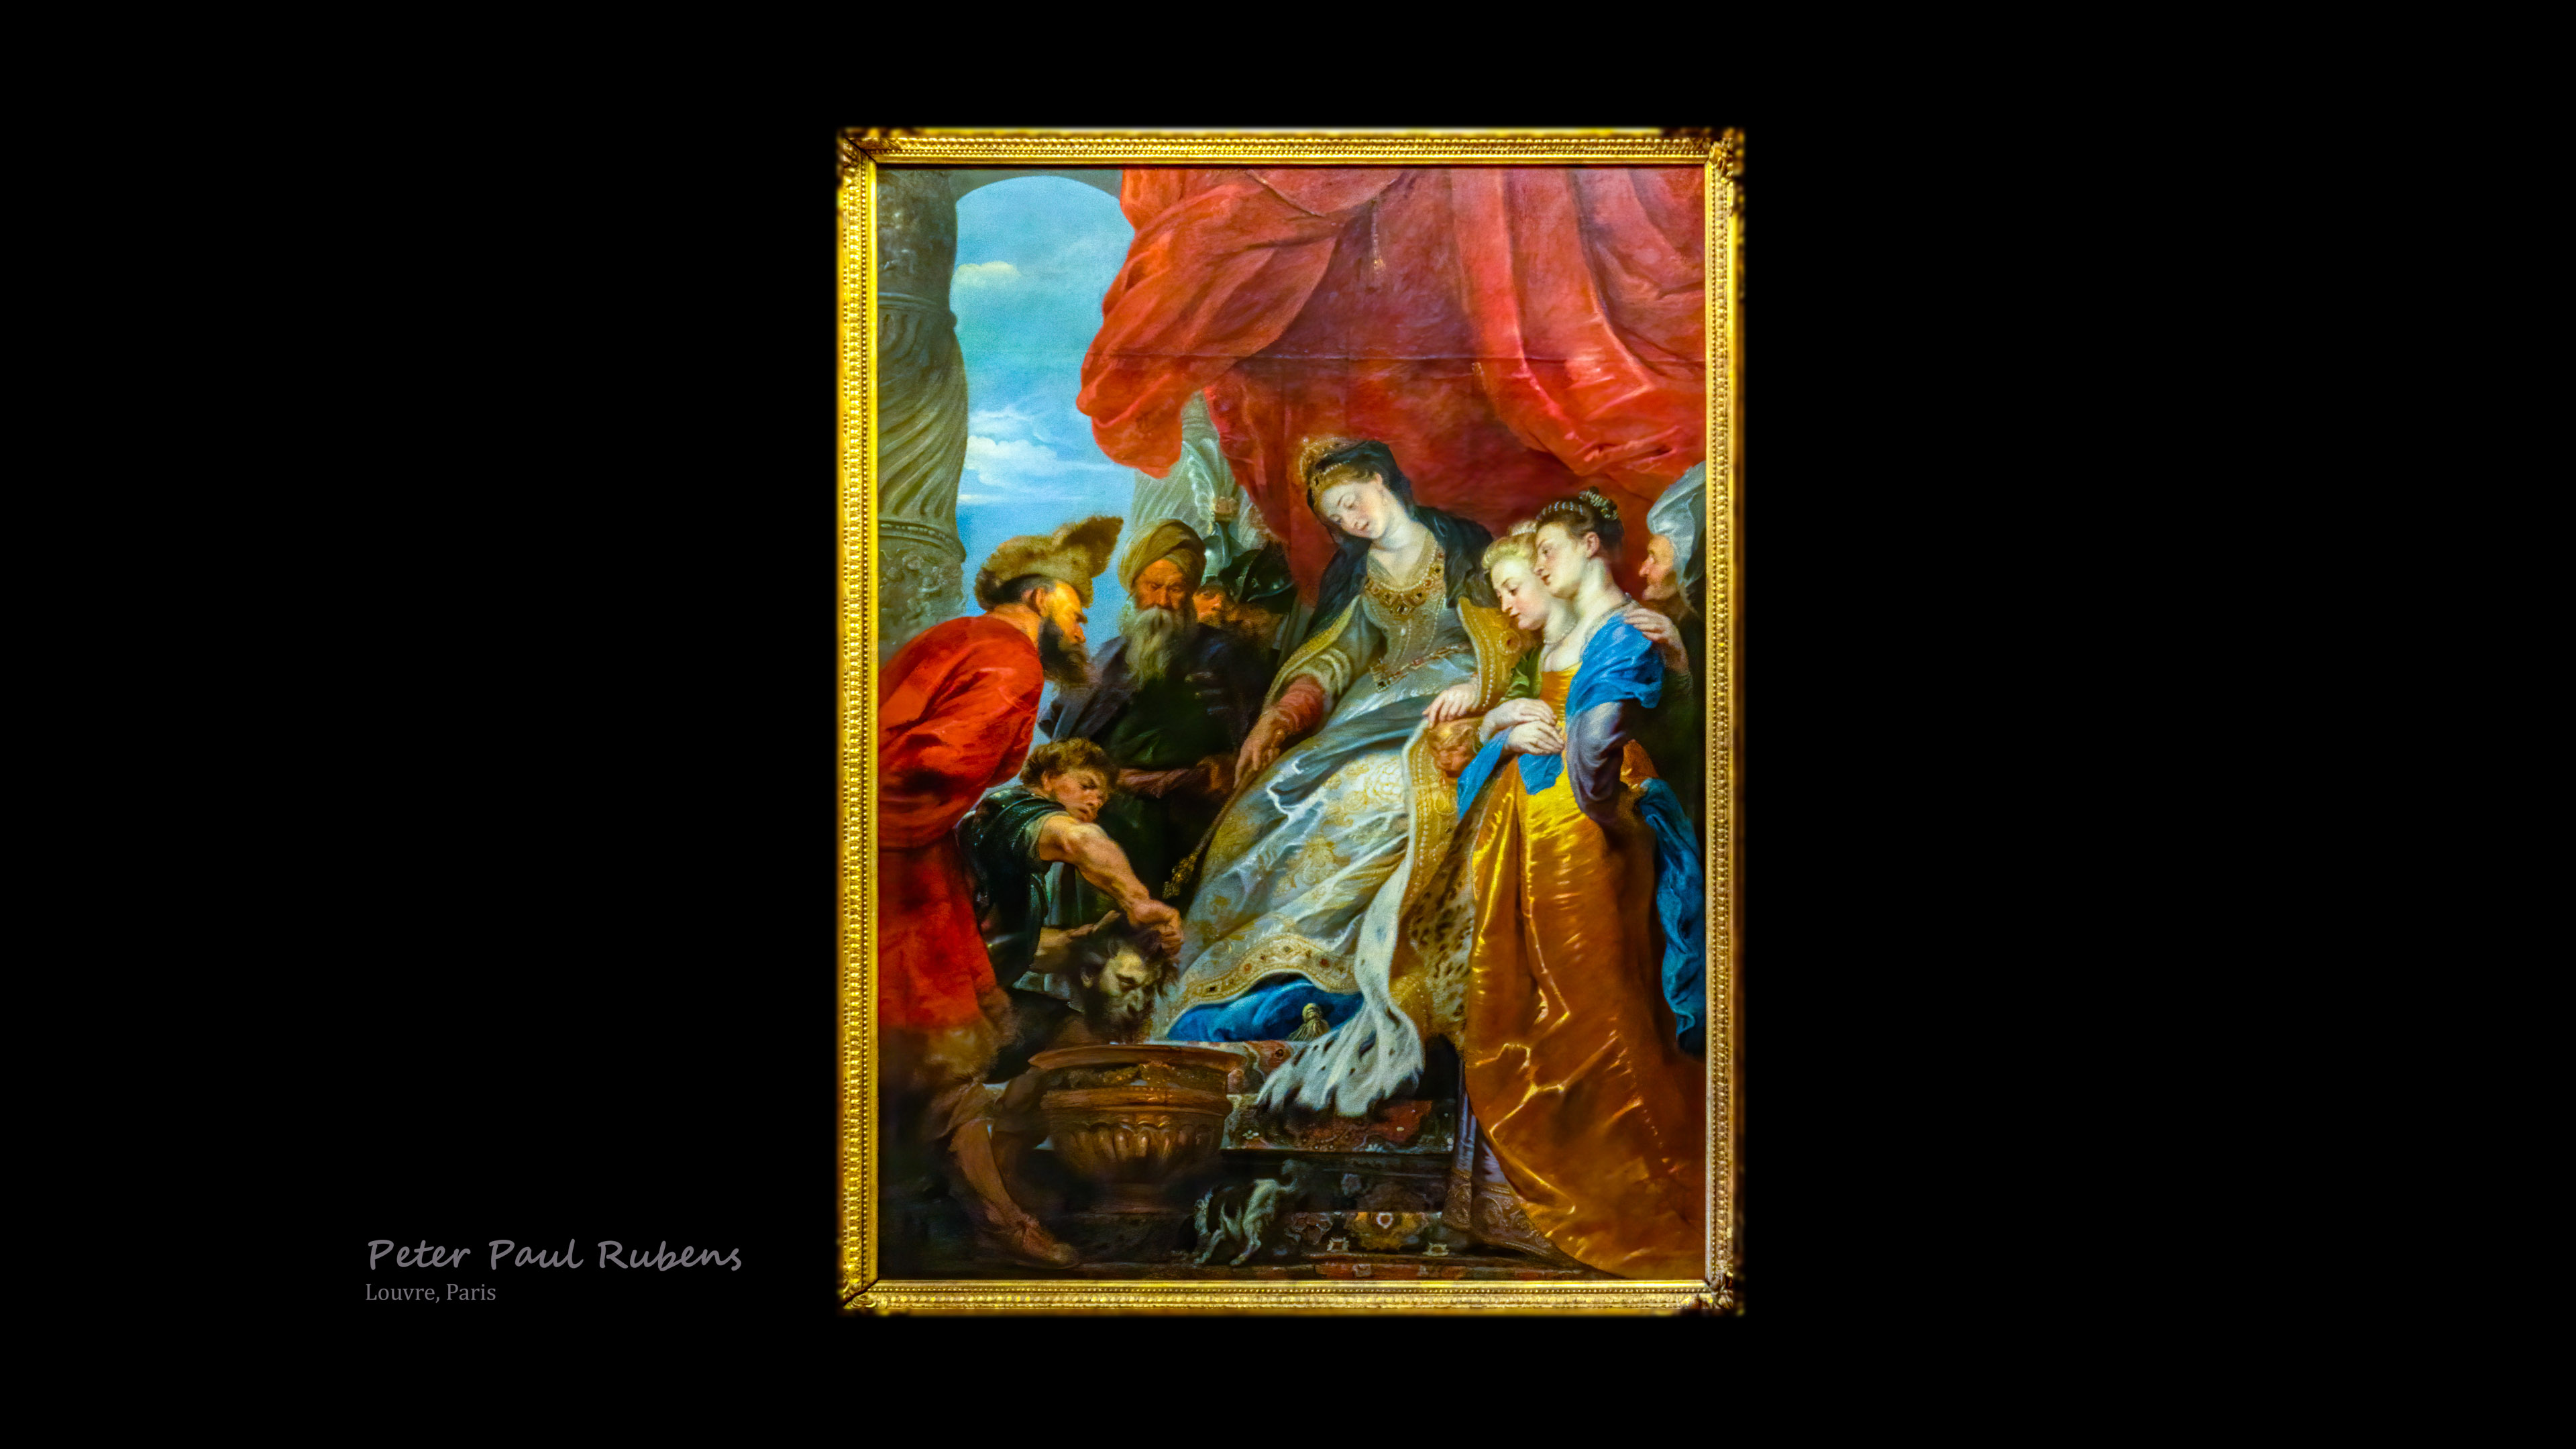 4Discover the Rubens painting wallpaper from Louvre and enter the surreal and fantastic world of his art, with intricate details and vivid colors in ultra HD resolution.